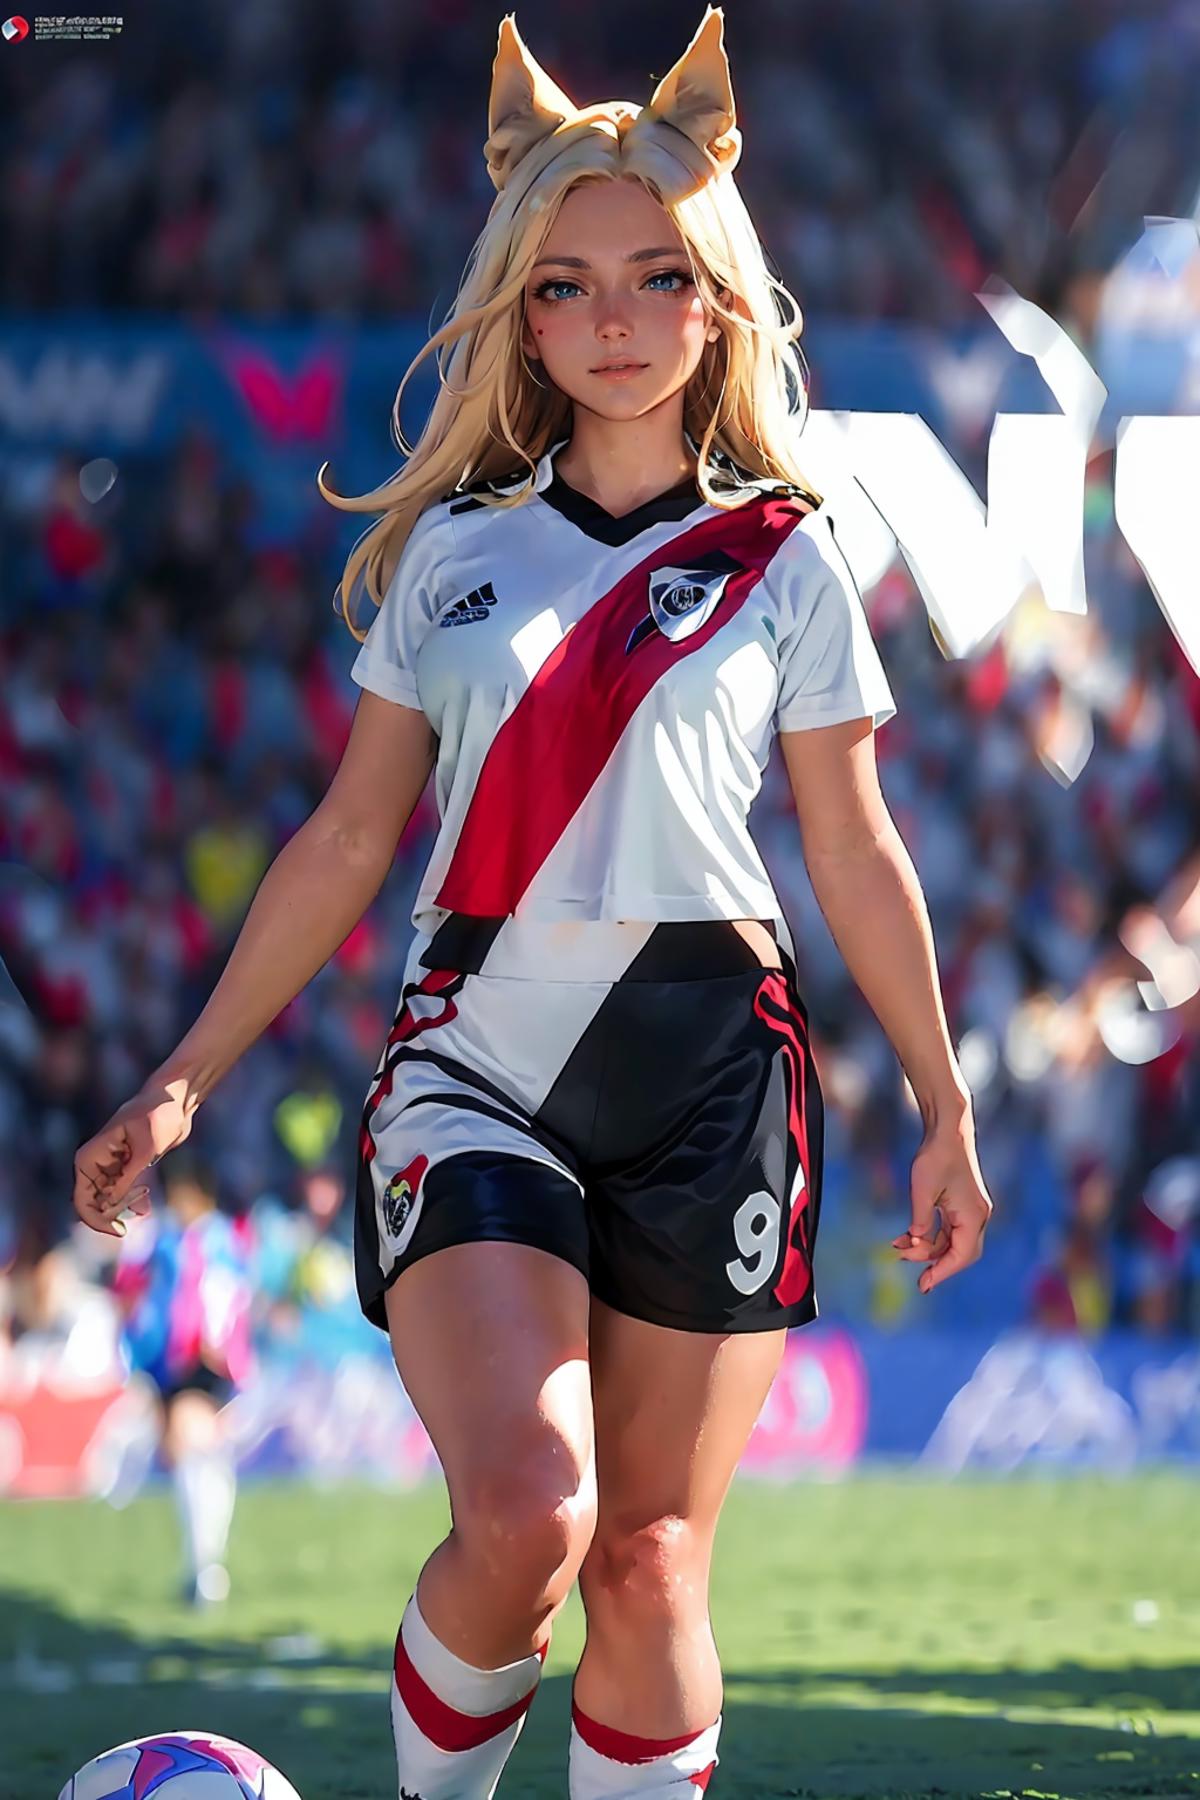 Soccer Uniforms - Clothing Gallery LYCORIS (20+ Football Uniforms) image by hattychan